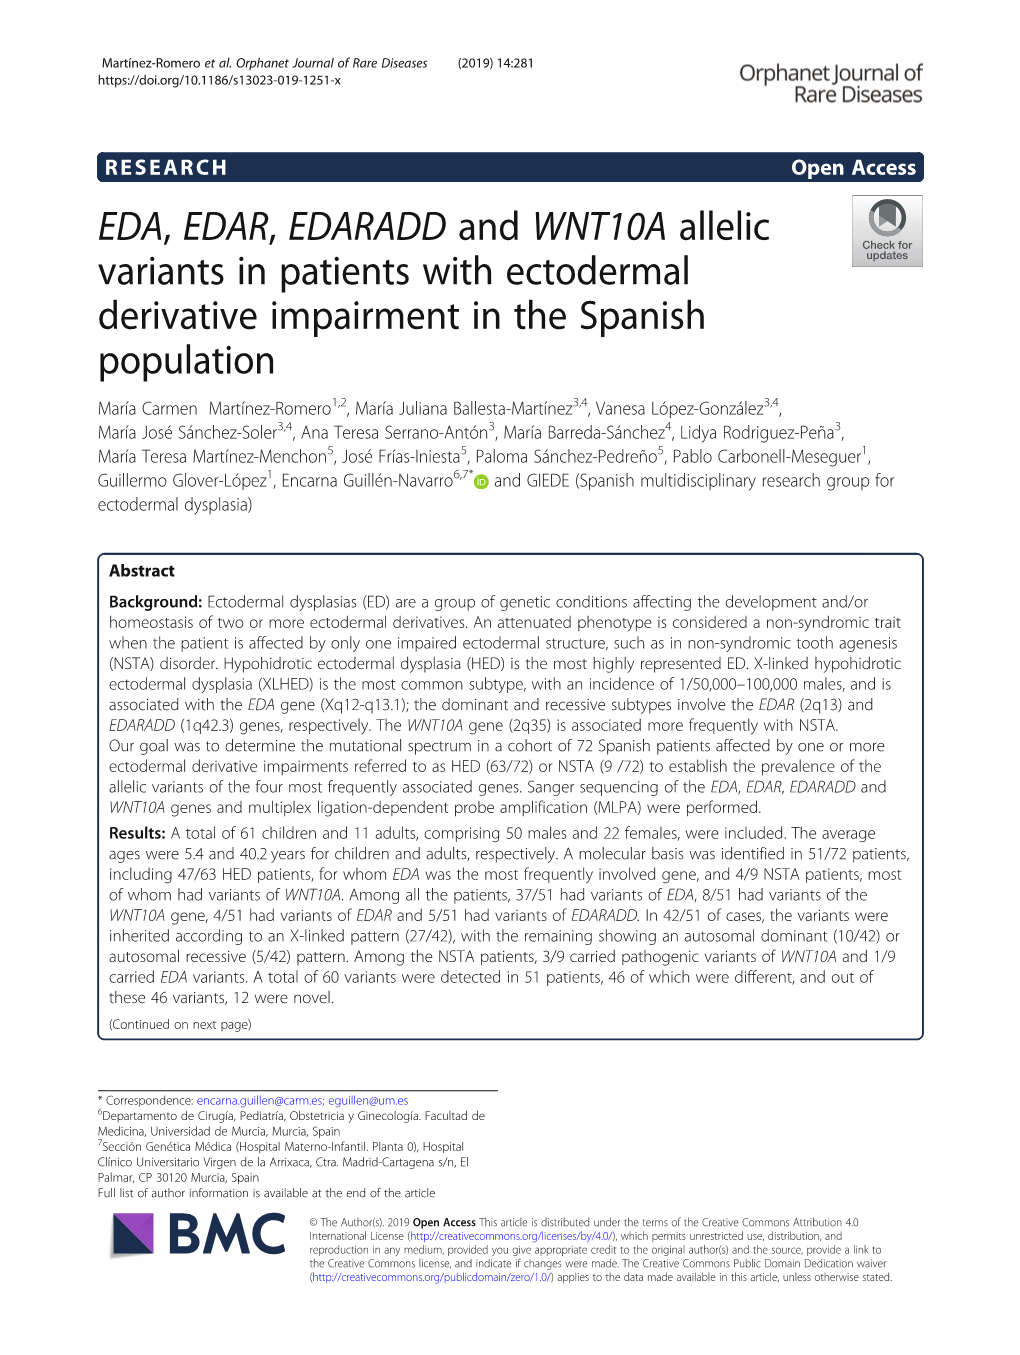 EDA, EDAR, EDARADD and WNT10A Allelic Variants in Patients With